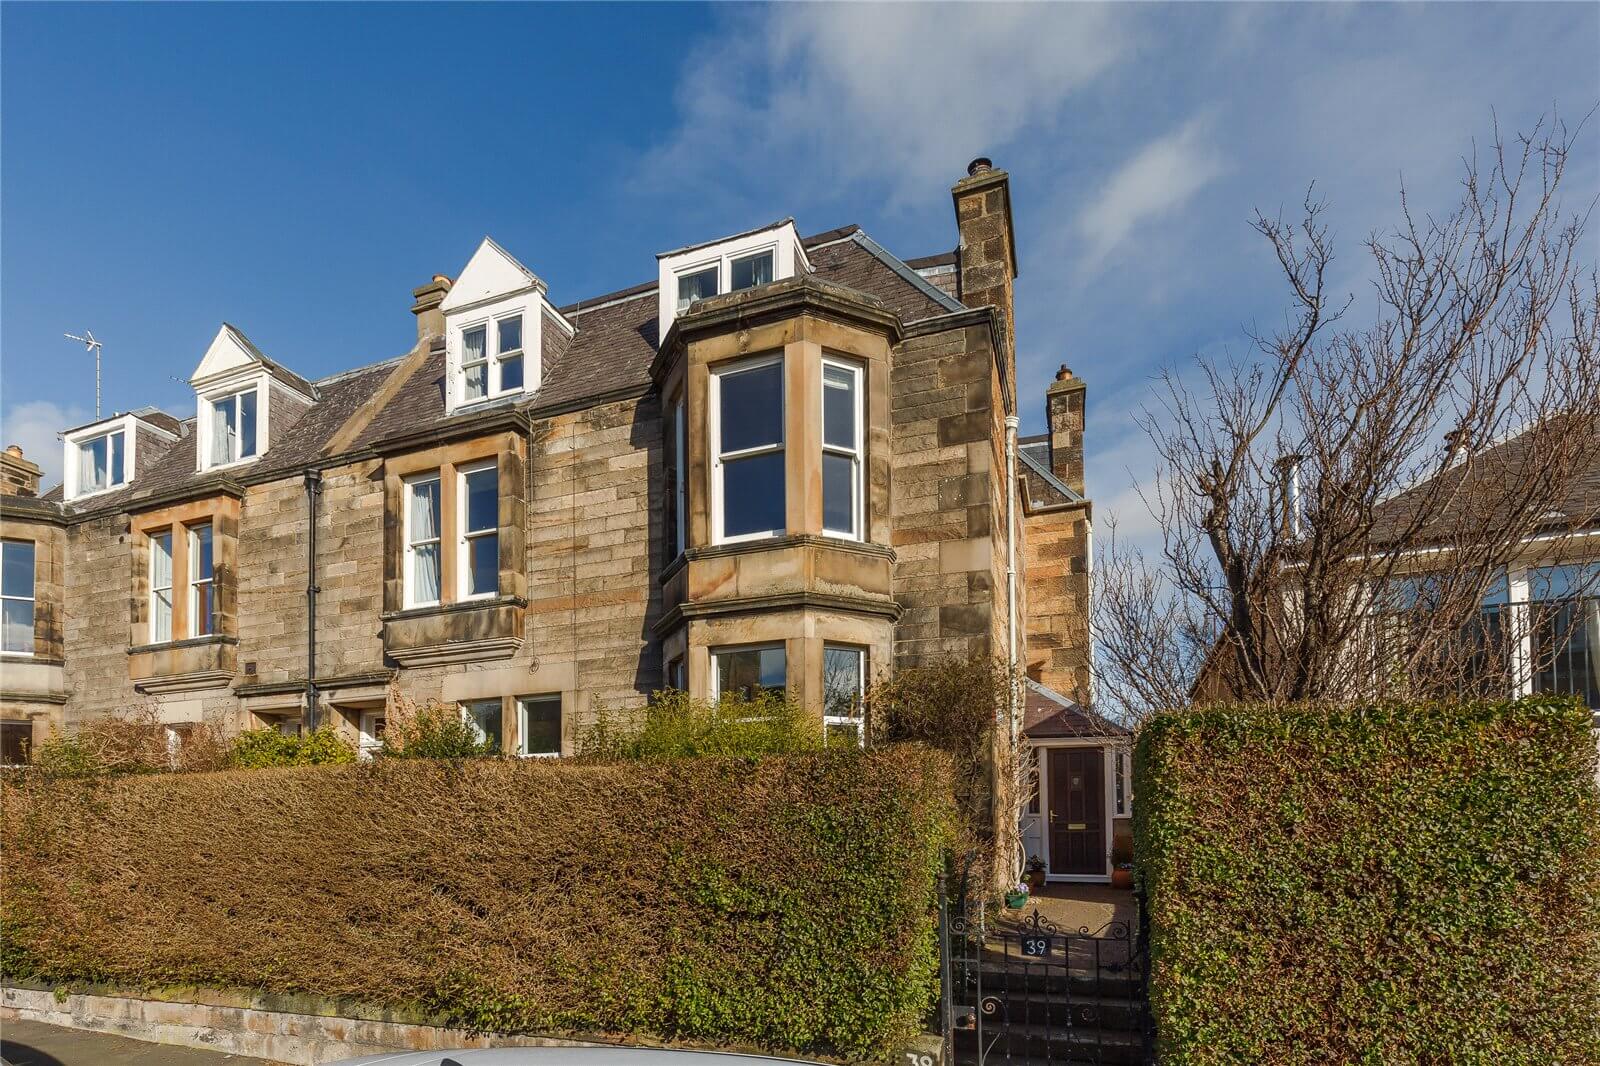 Our latest properties for sale and to let (4th March 2019)